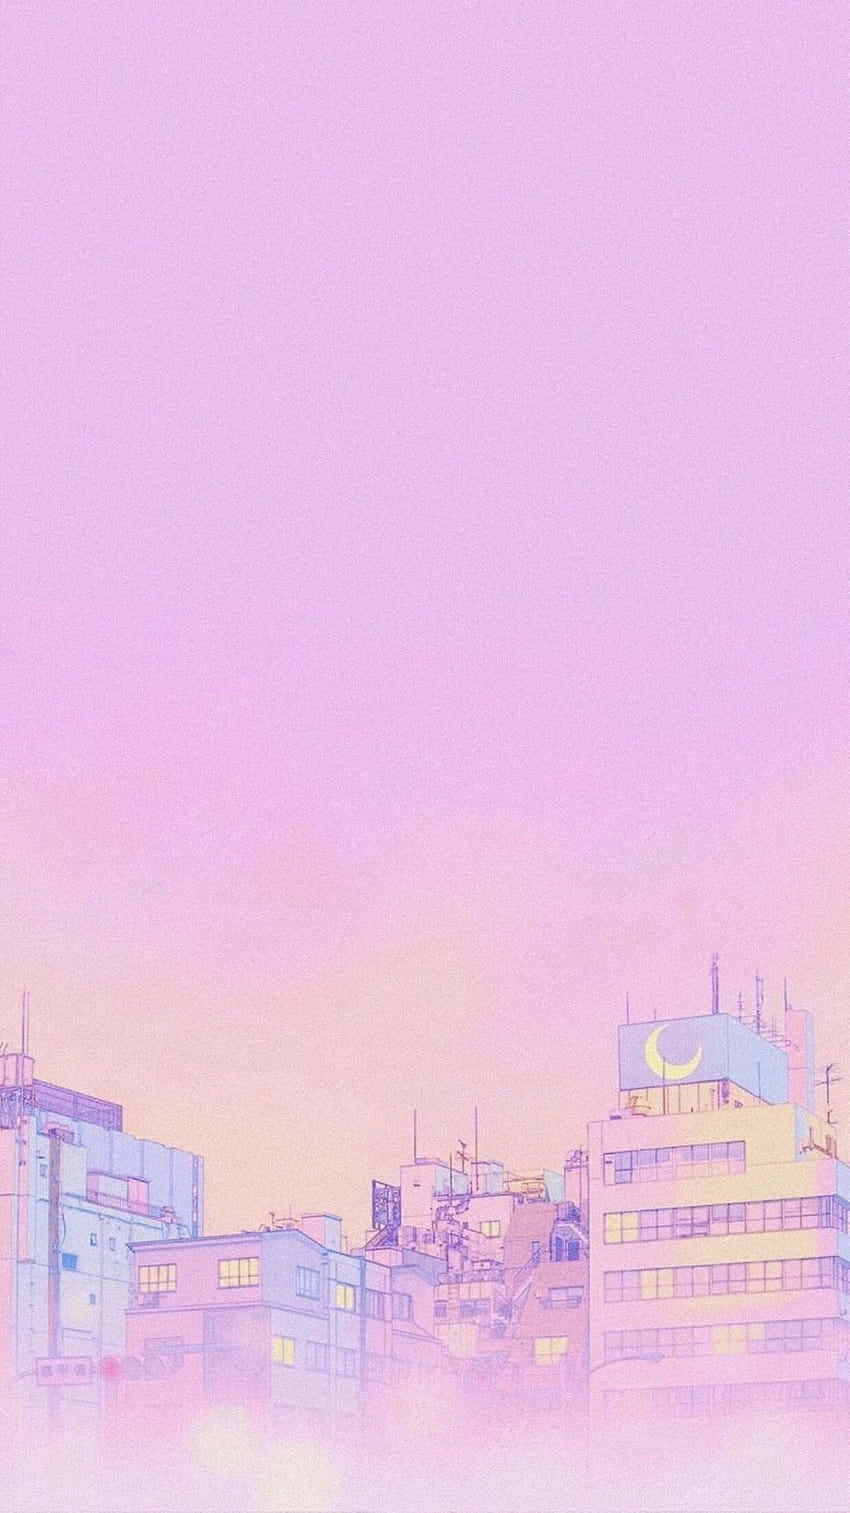 A purple city skyline with buildings and clouds - Pastel pink, pink anime